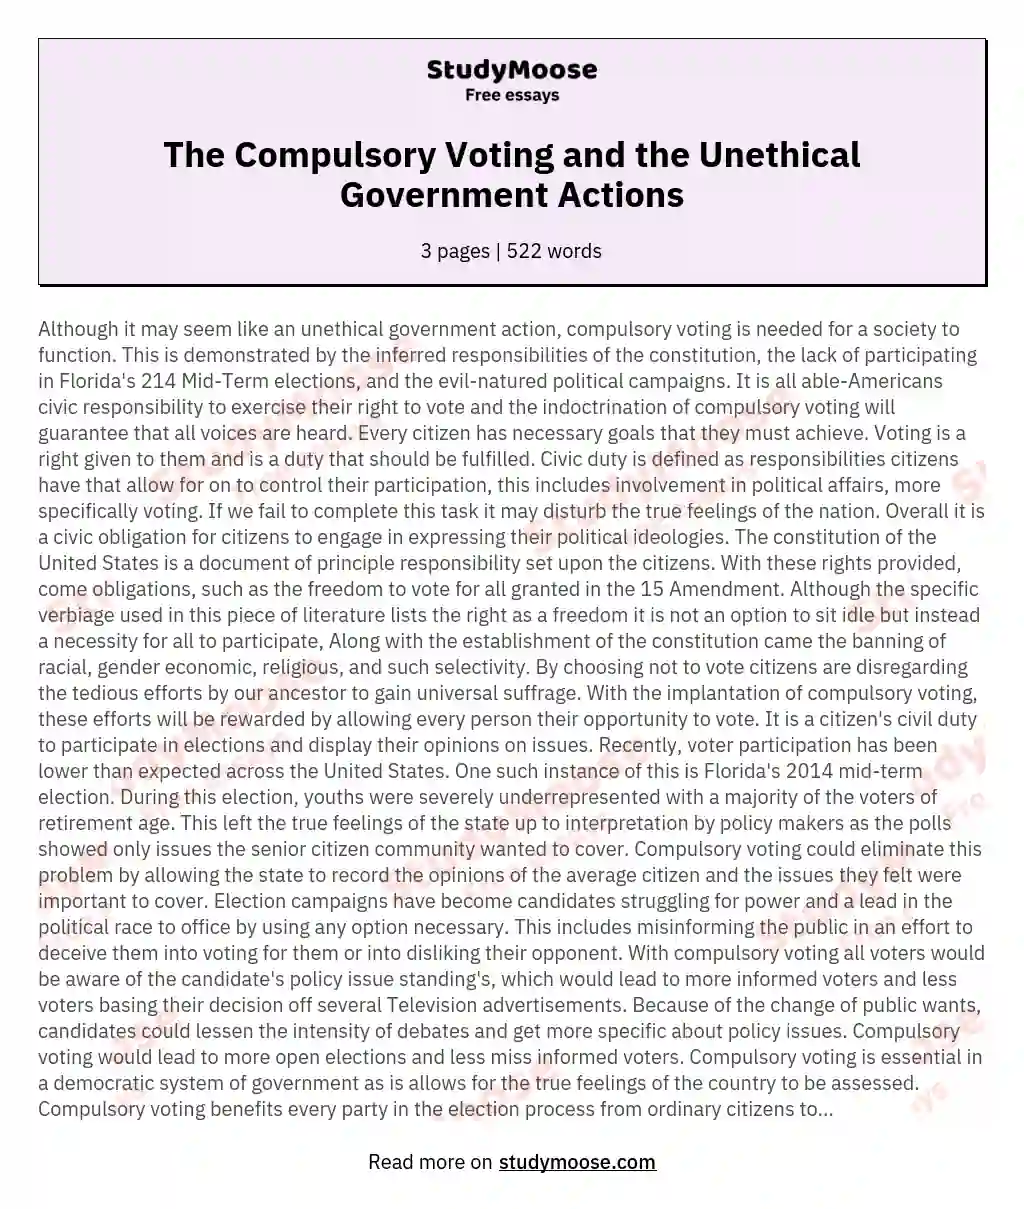 The Compulsory Voting and the Unethical Government Actions essay